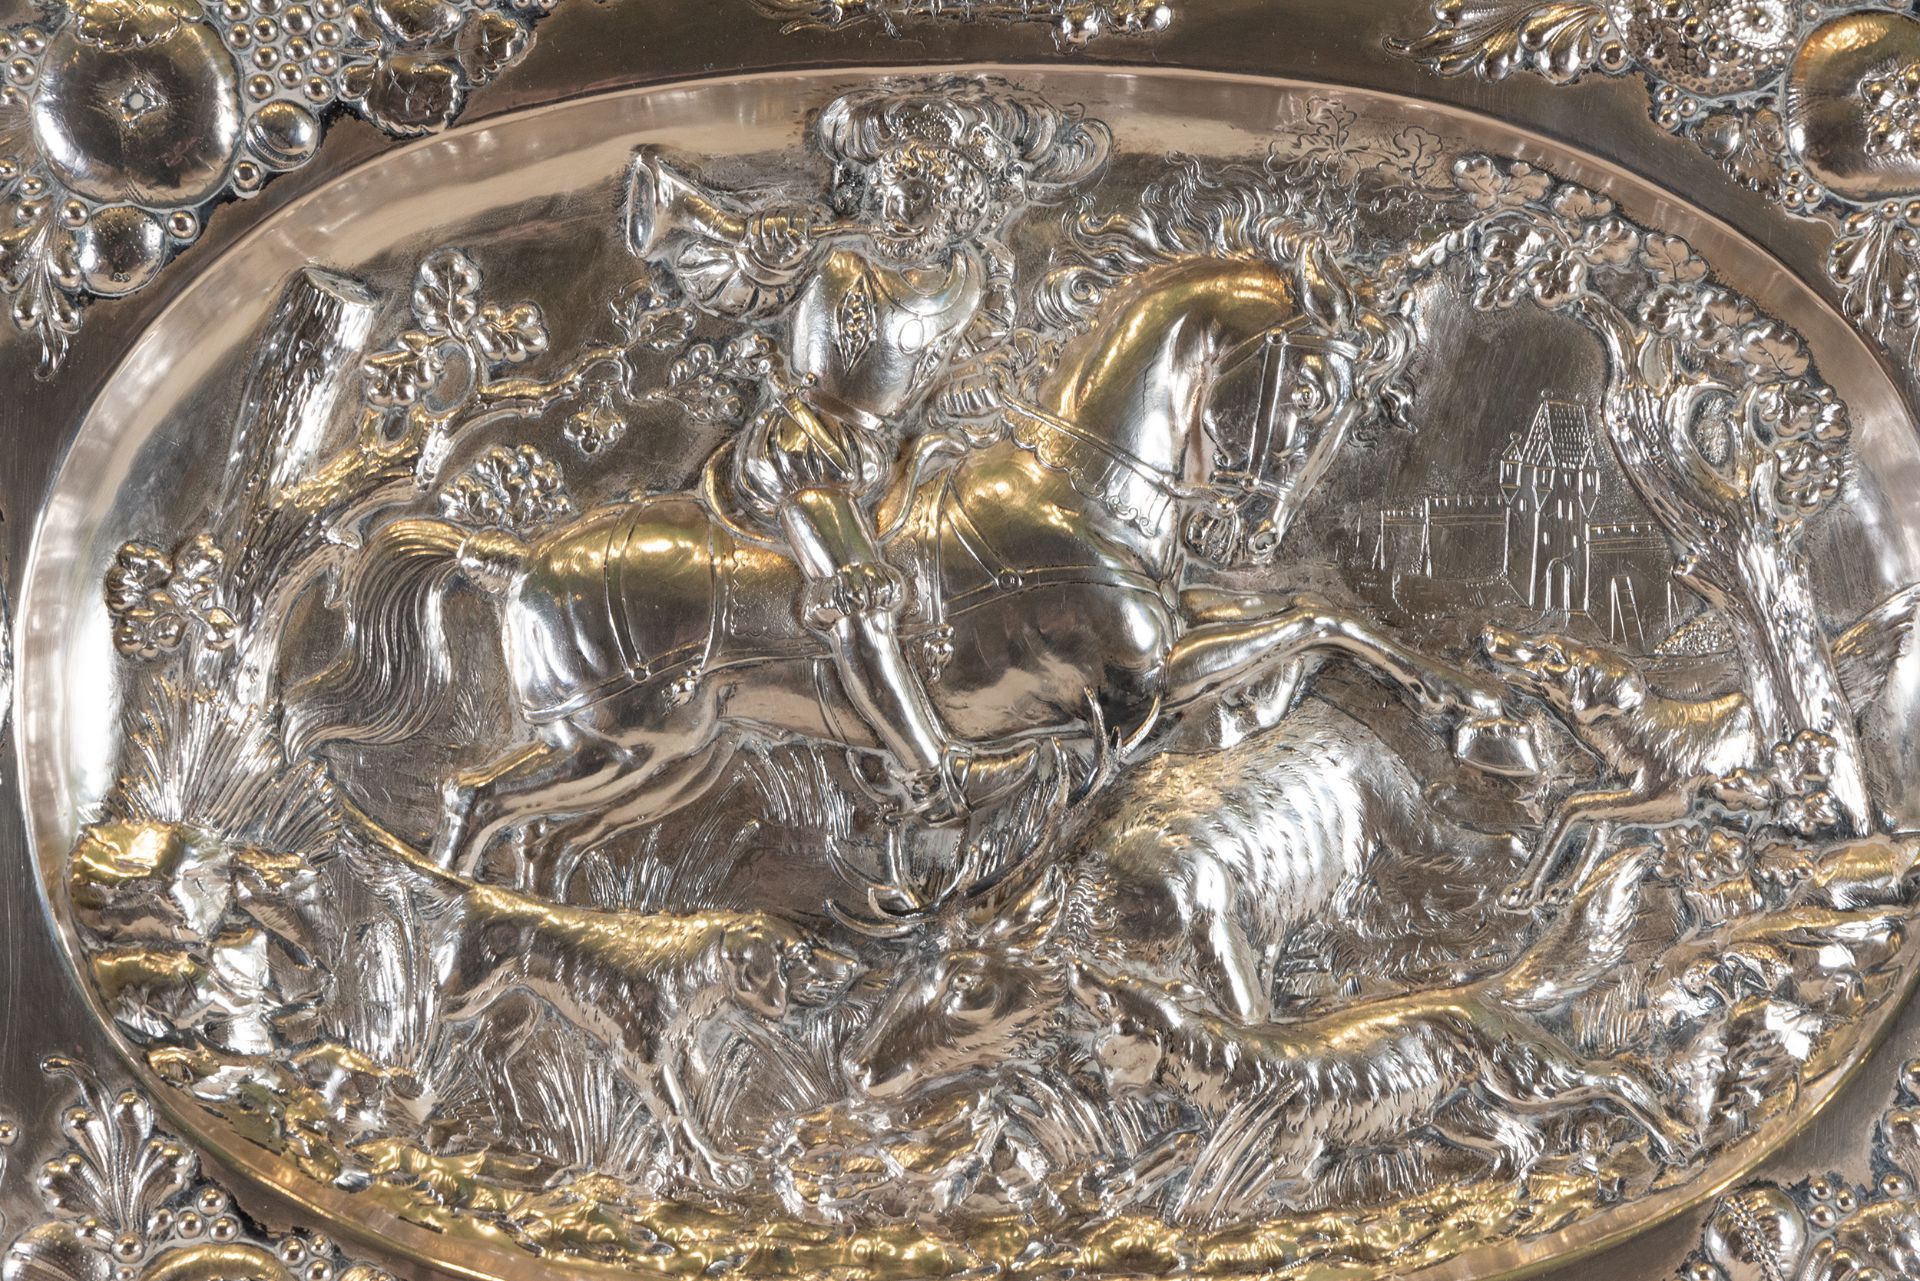 Large Pair of Sterling Silver Trays with Chivalry Motifs, Marks of England, 19th Century